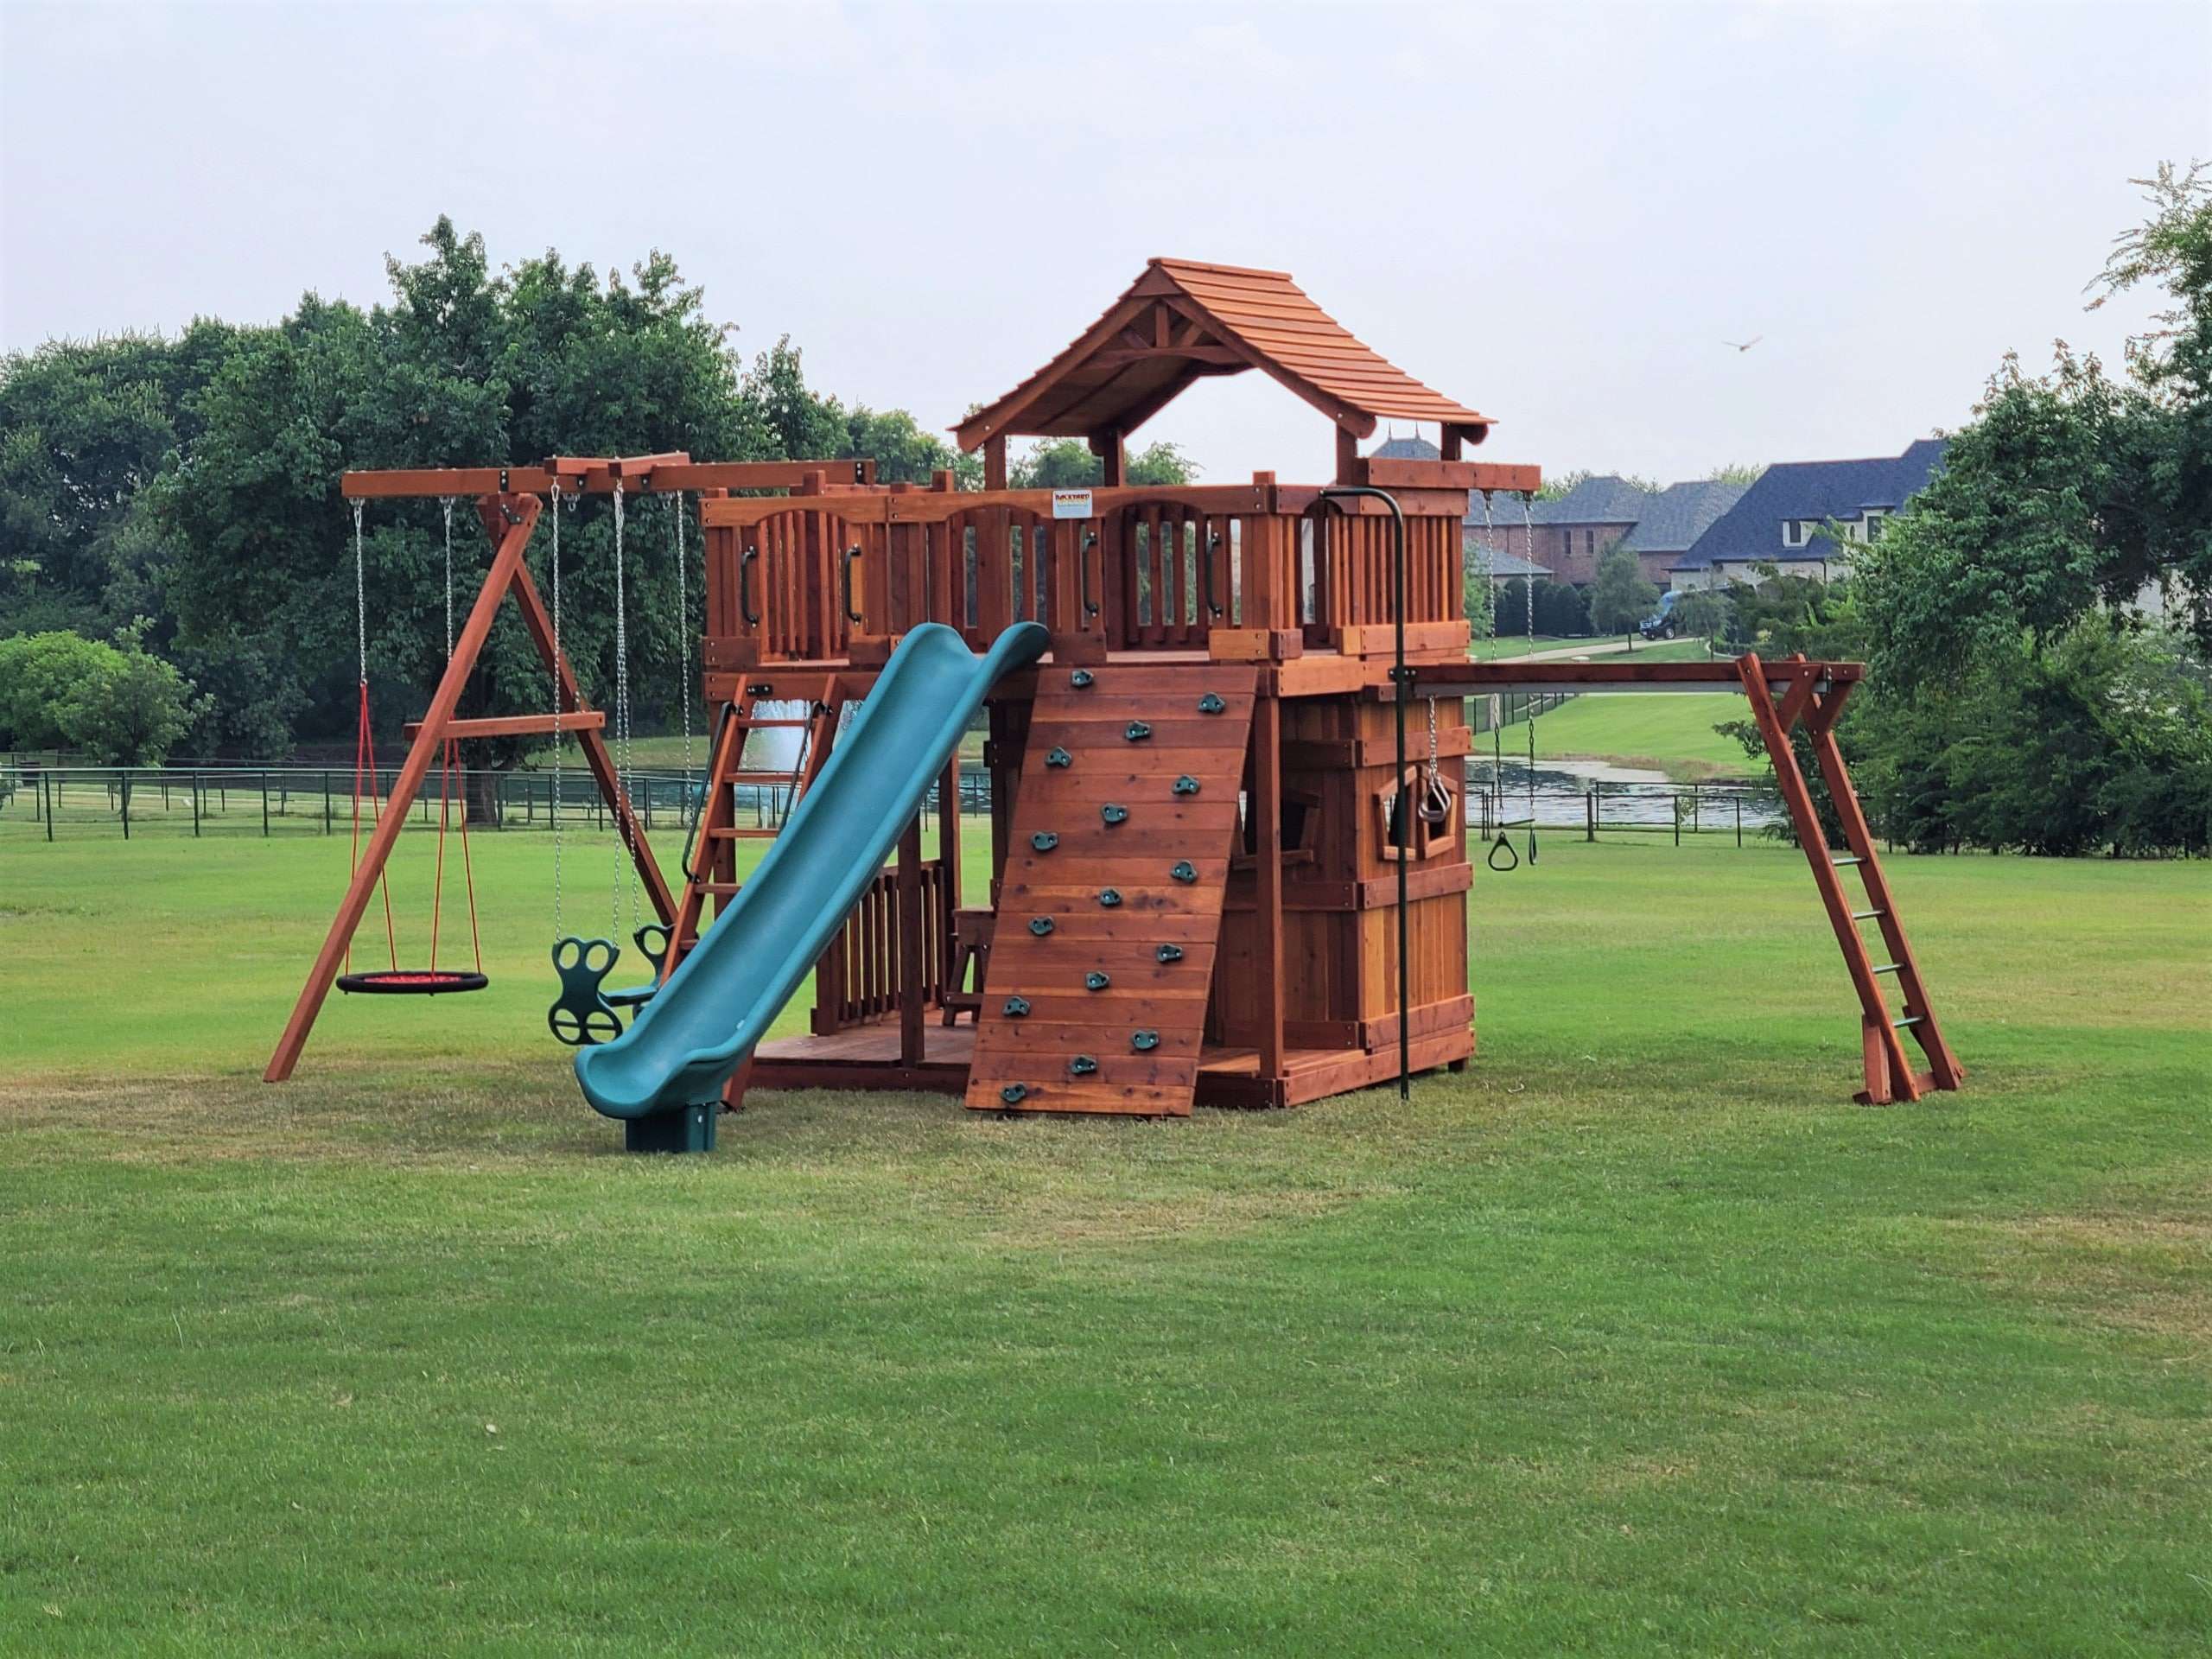 Dallas Fort Worth Texas, Montgomery, Texas, fort stockton with overhead climber swing set with upper wrap around deck, lower cabin rock wall